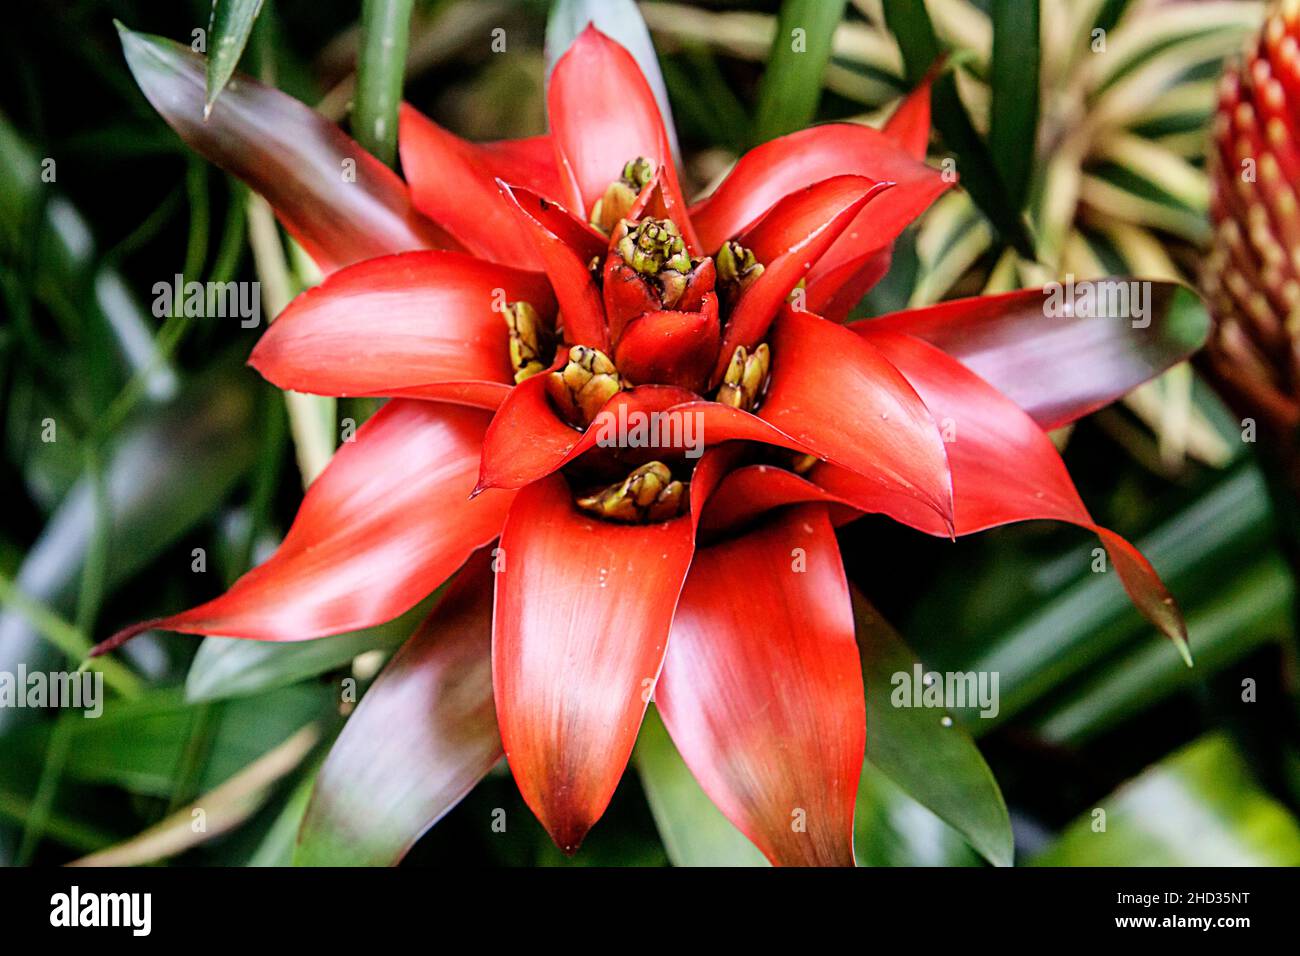 Closeup of a red bromelia with its green leaves on a blurry background Stock Photo